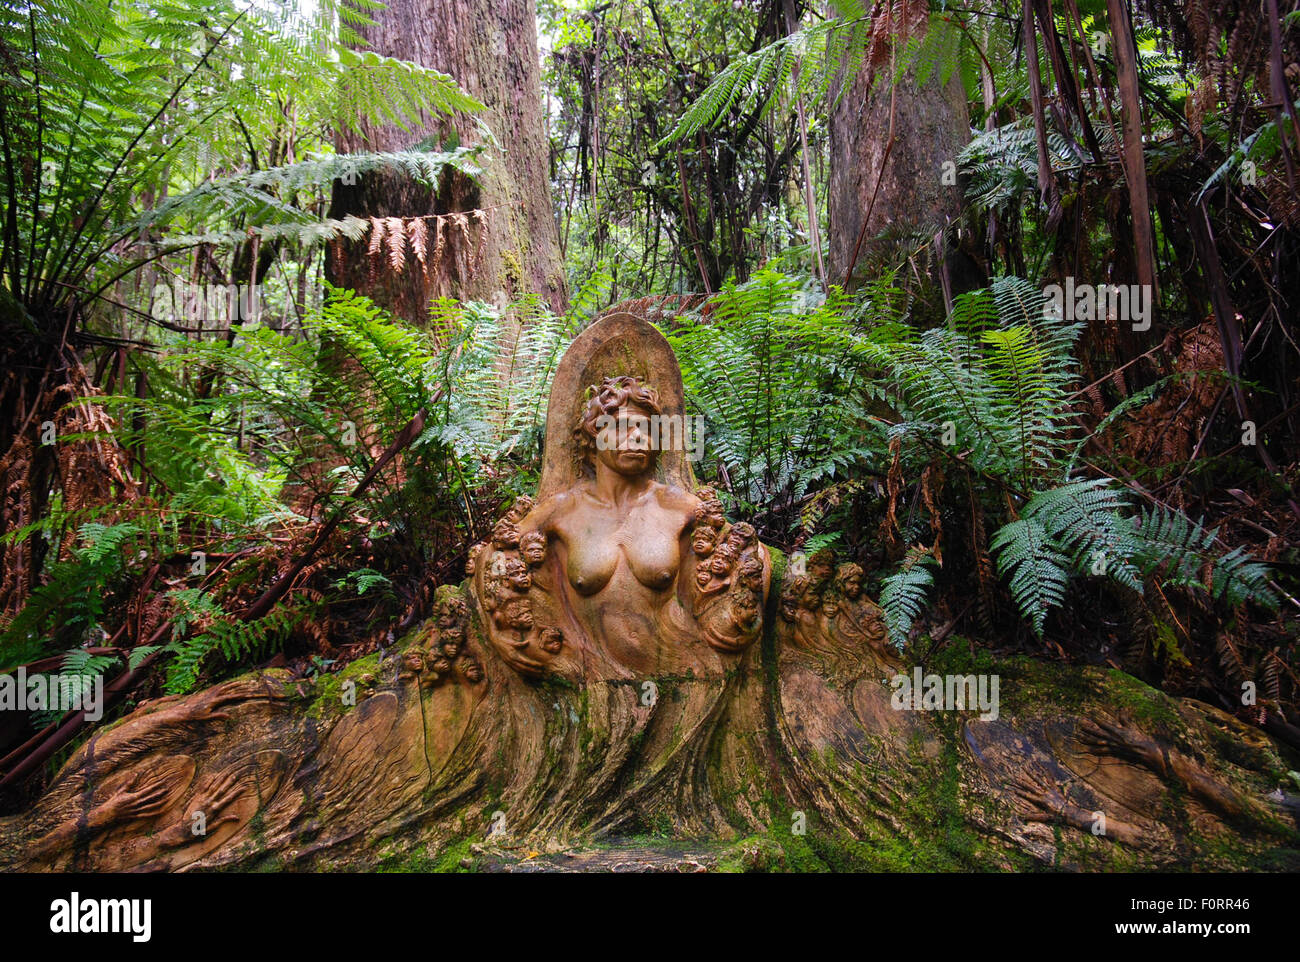 Mystical sculptures in natural setting. Stock Photo